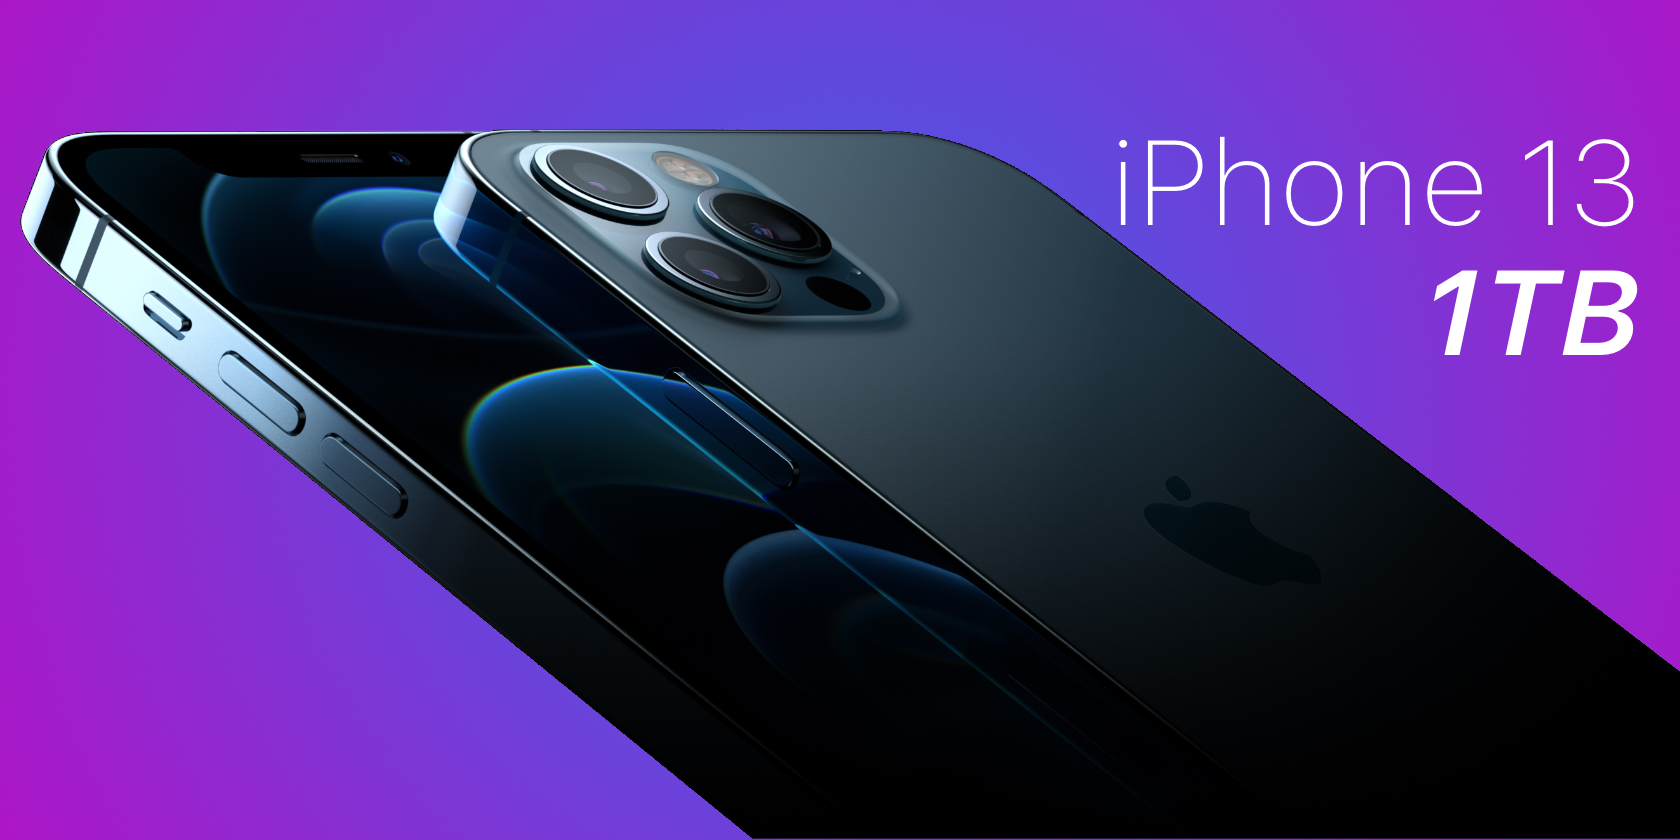 An illustration showing an iPhone 12 Pro set against a colorful background with the words